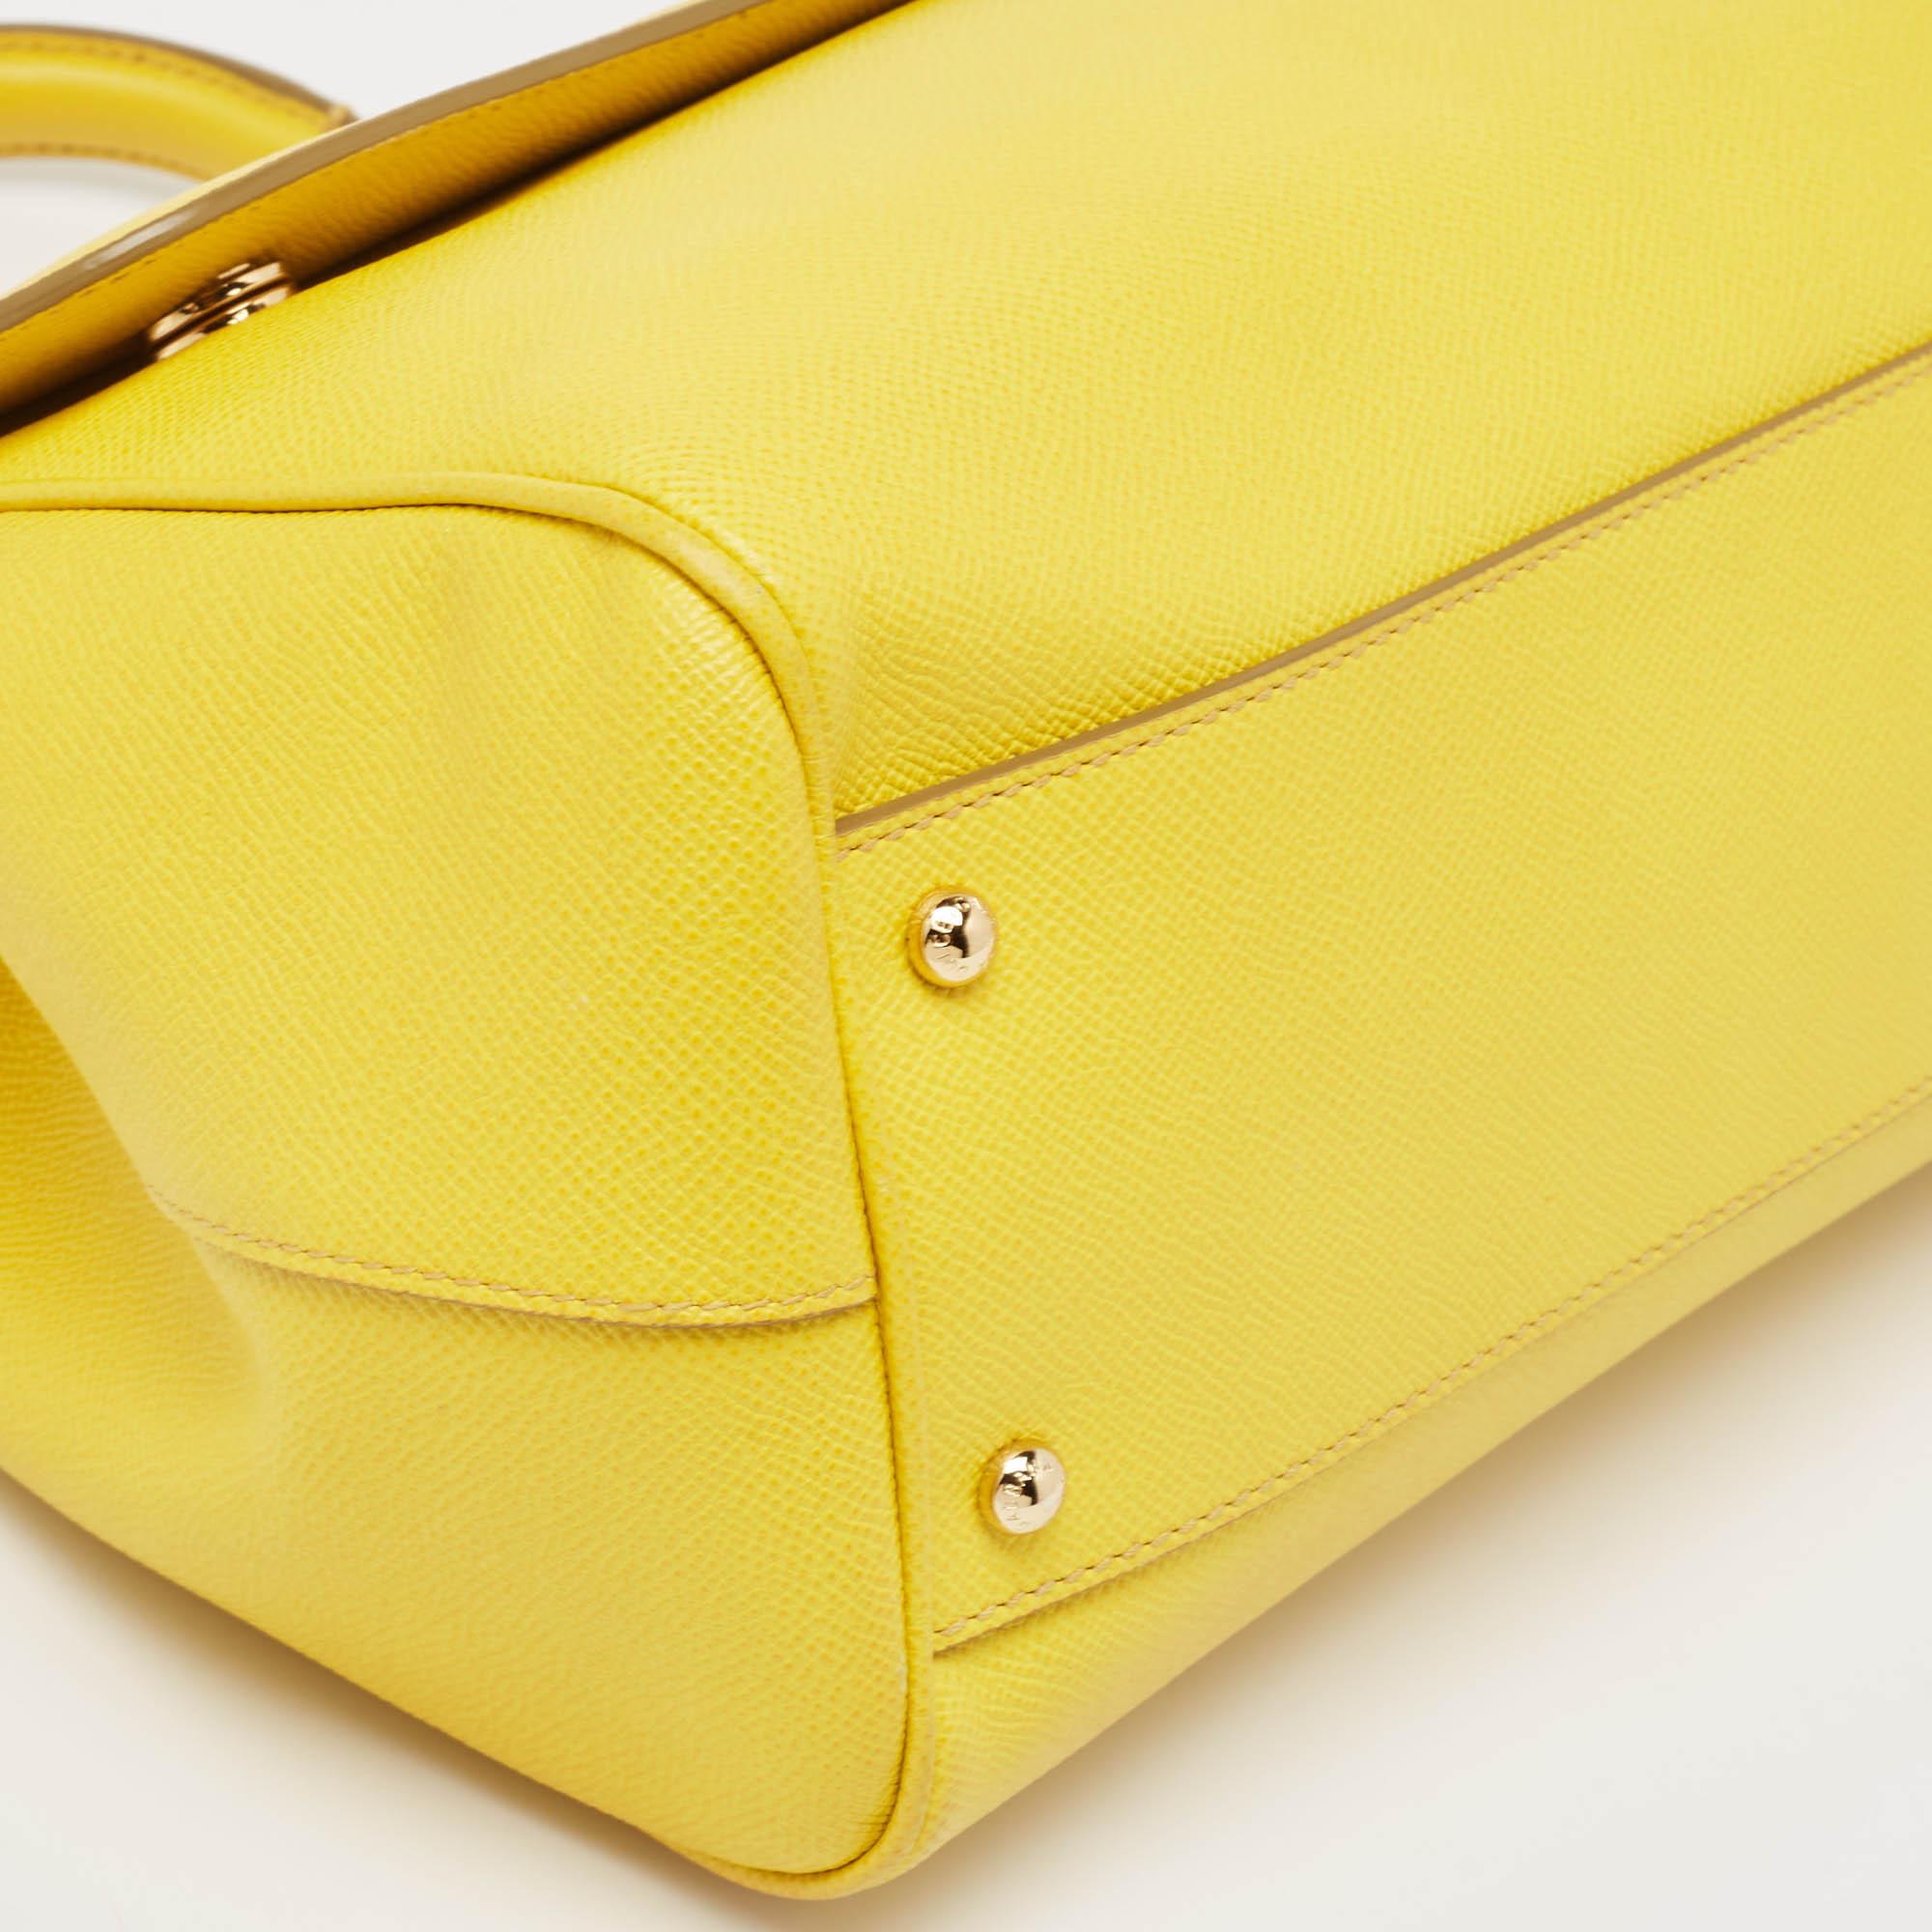 Dolce & Gabbana Yellow Leather Large Miss Sicily Top Handle Bag In Good Condition For Sale In Dubai, Al Qouz 2